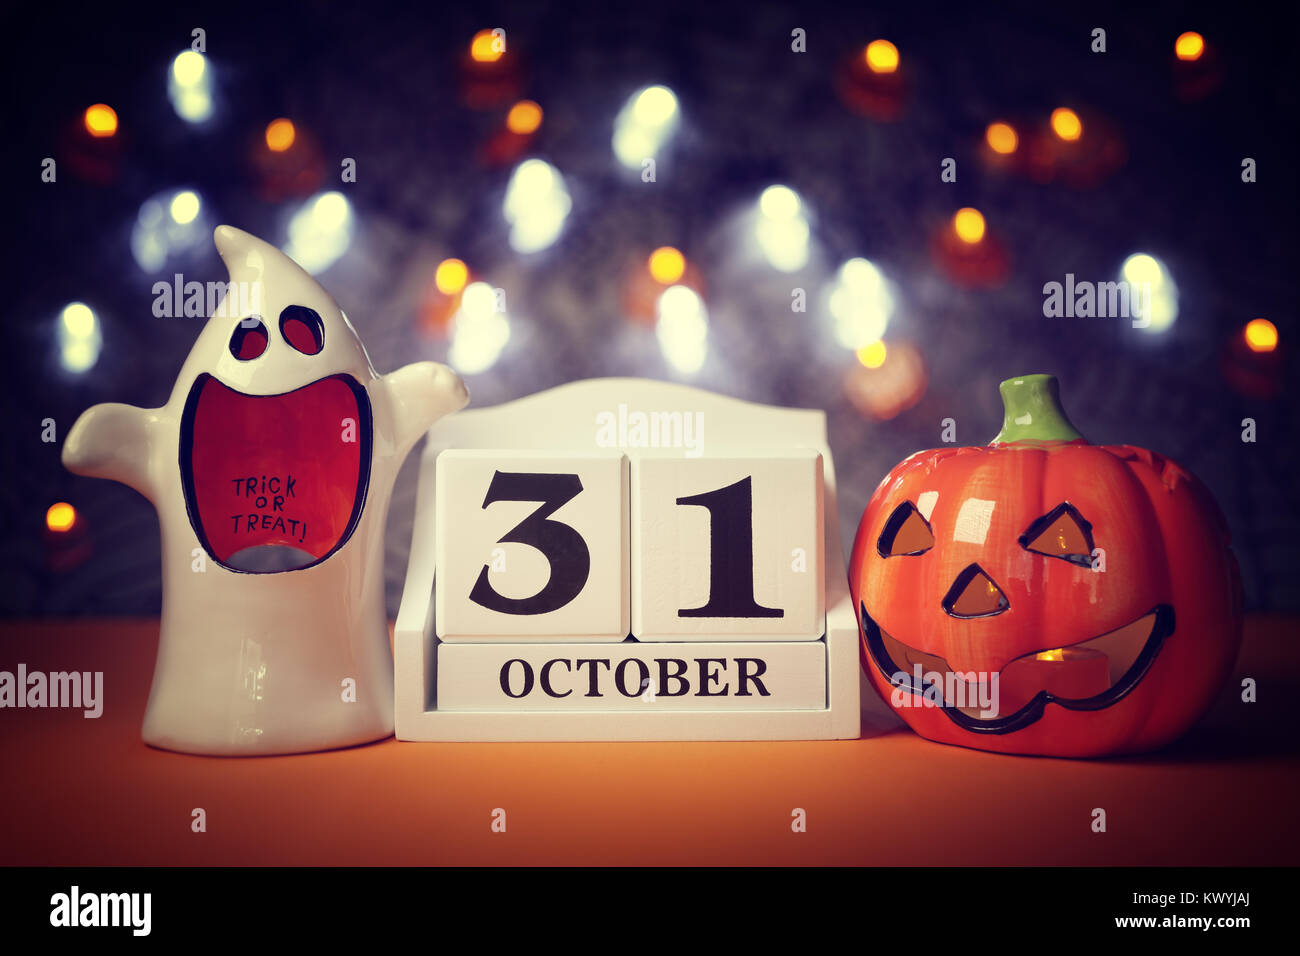 Halloween calendar date 31st October with pumpkin and ghost Stock Photo